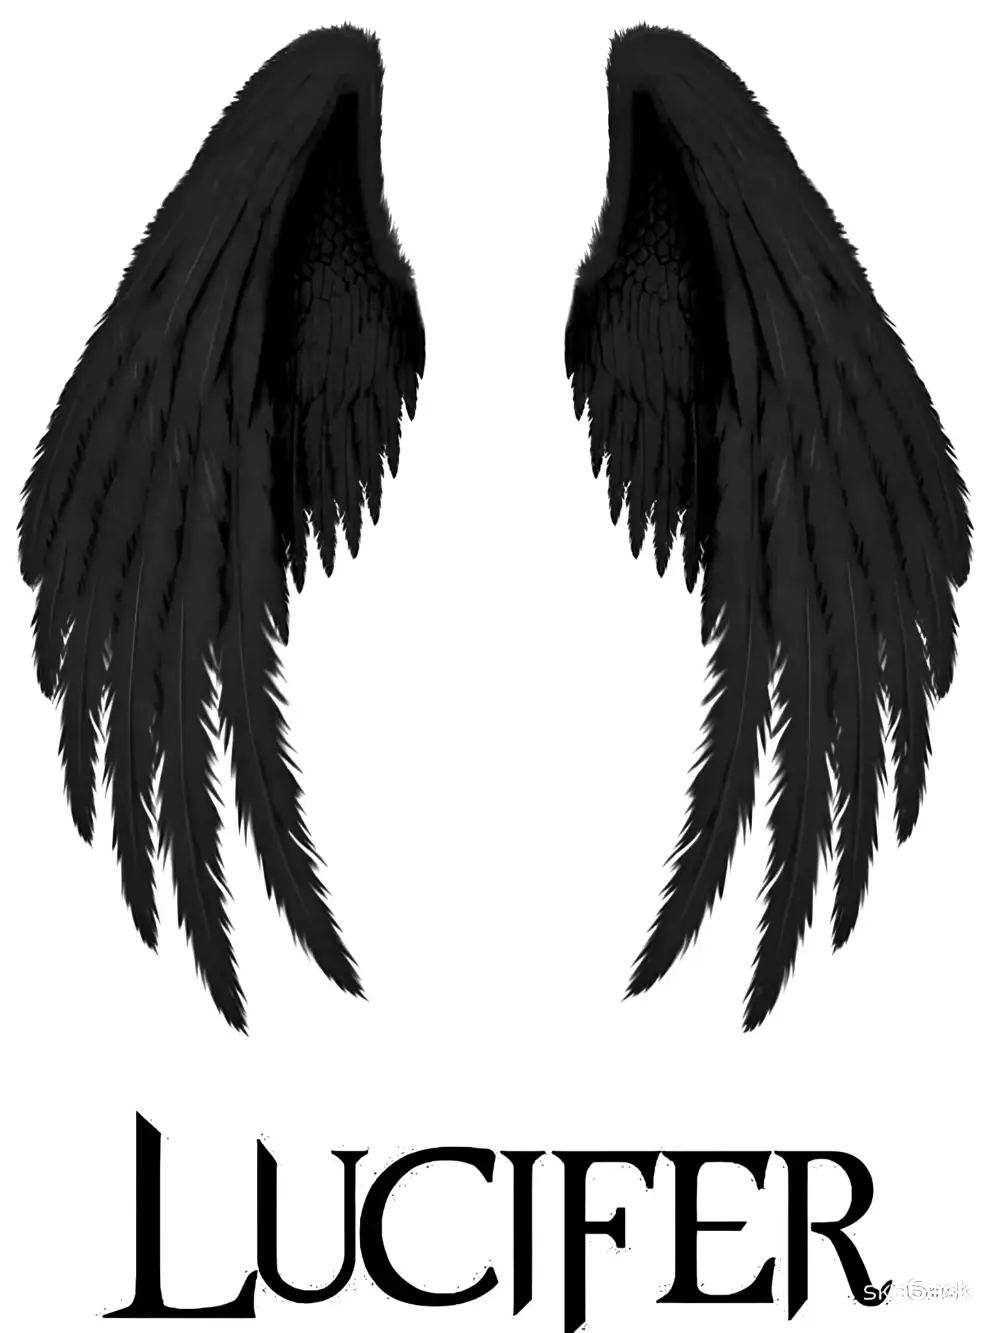 You are currently viewing Lucifer wings hd wallpaper